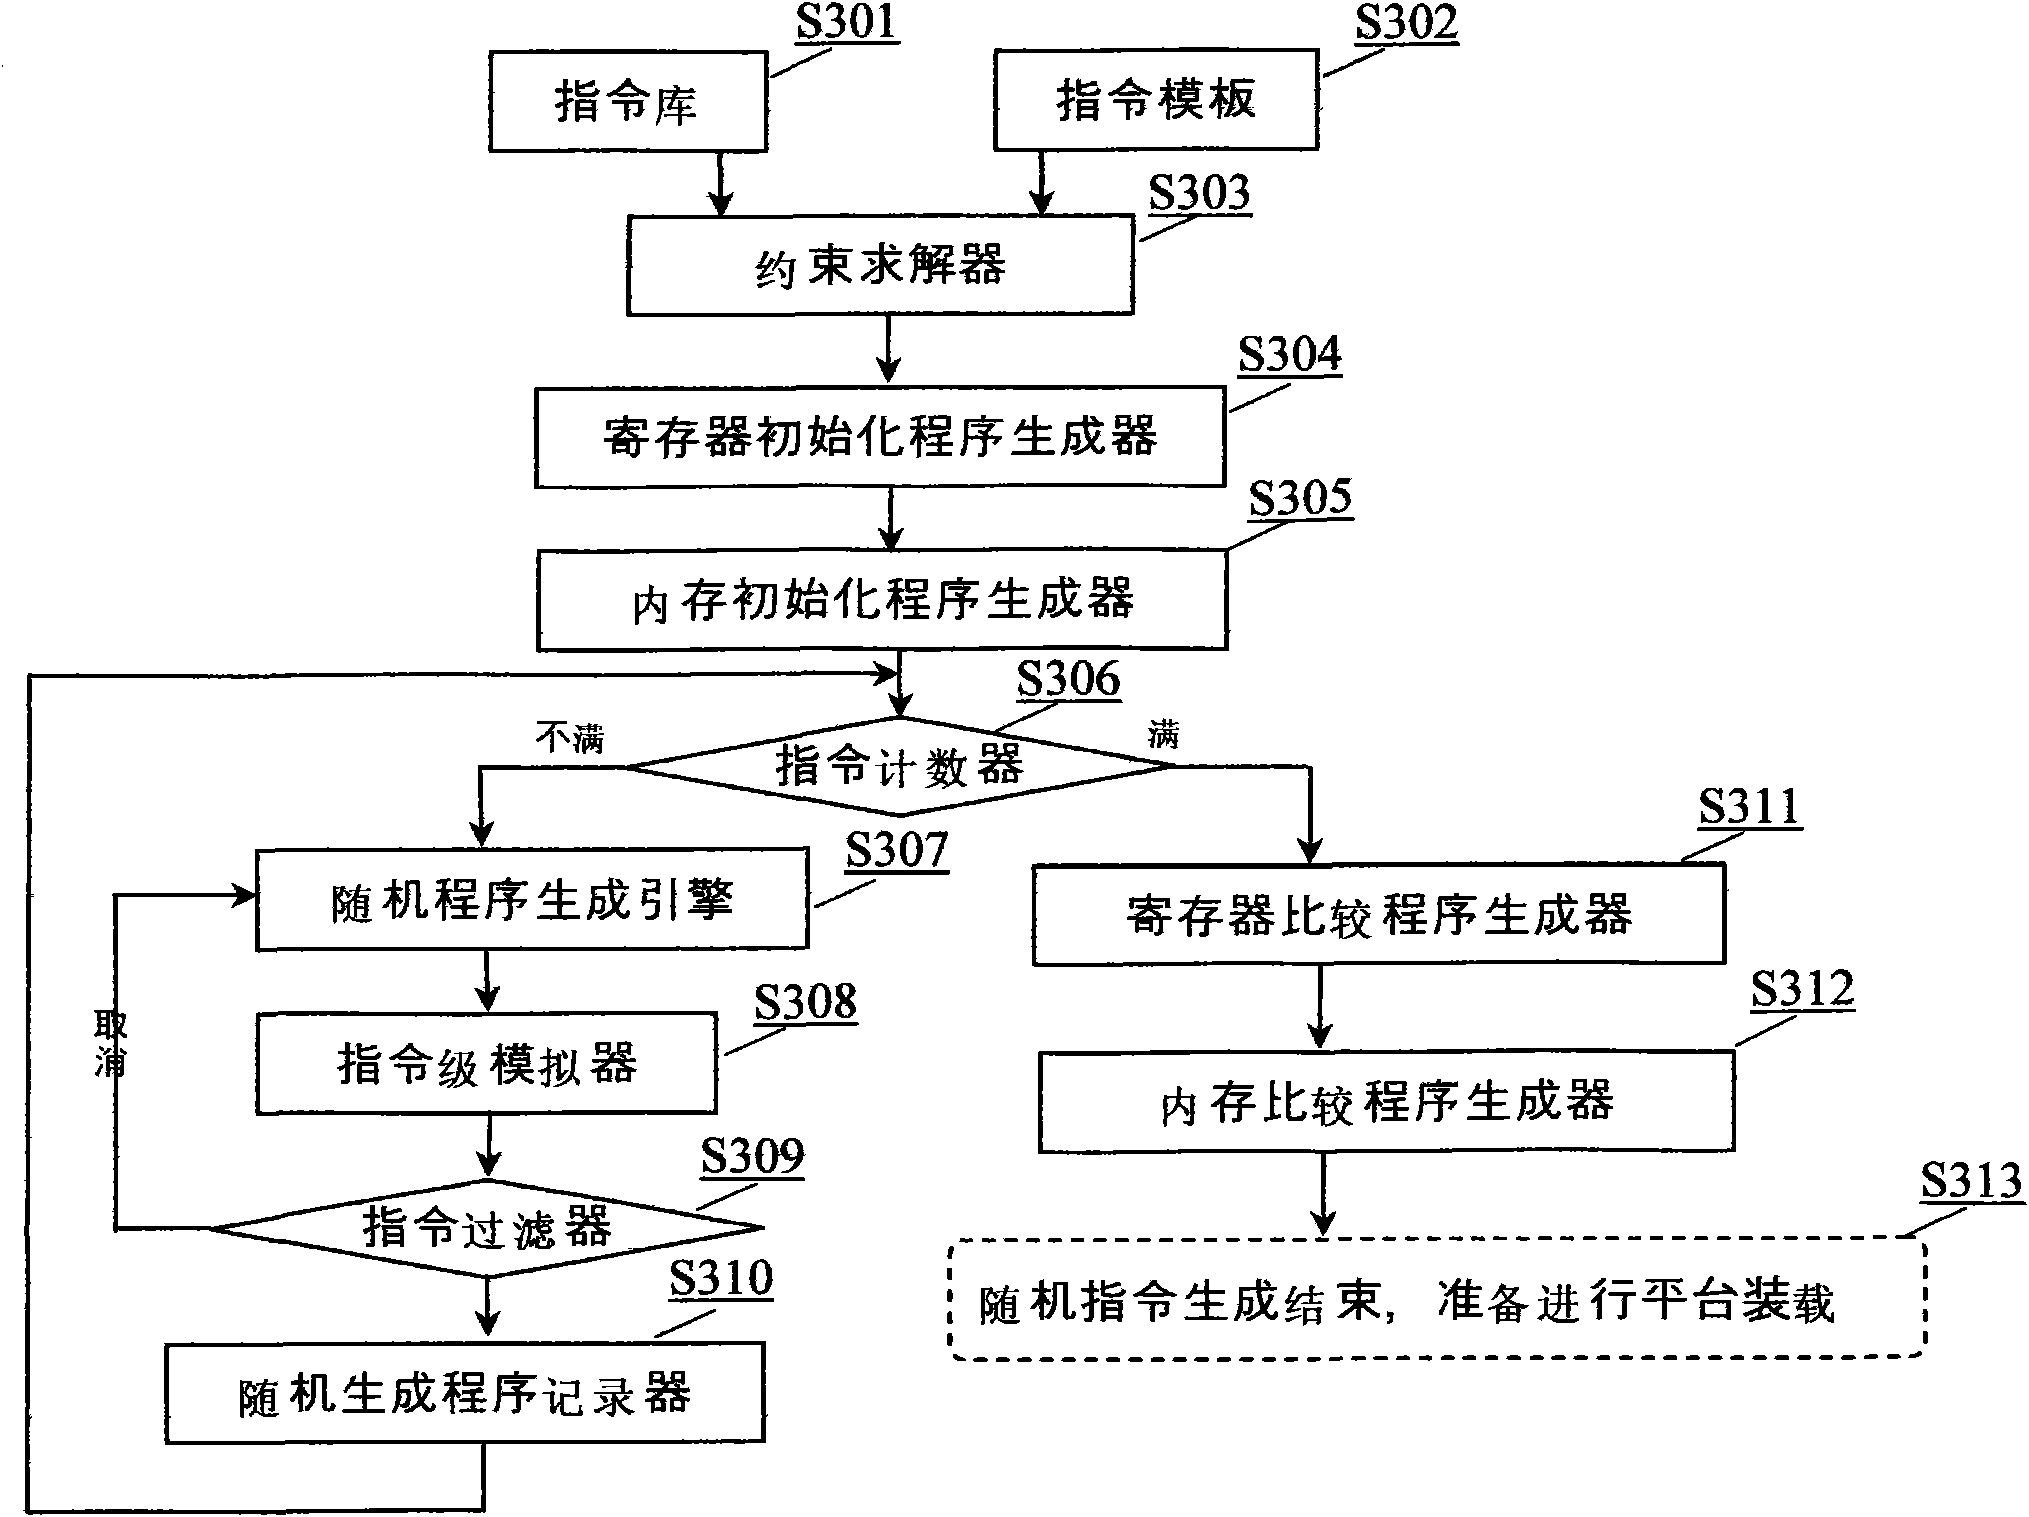 Random verification method and device for verifying processor chip after manufacturing